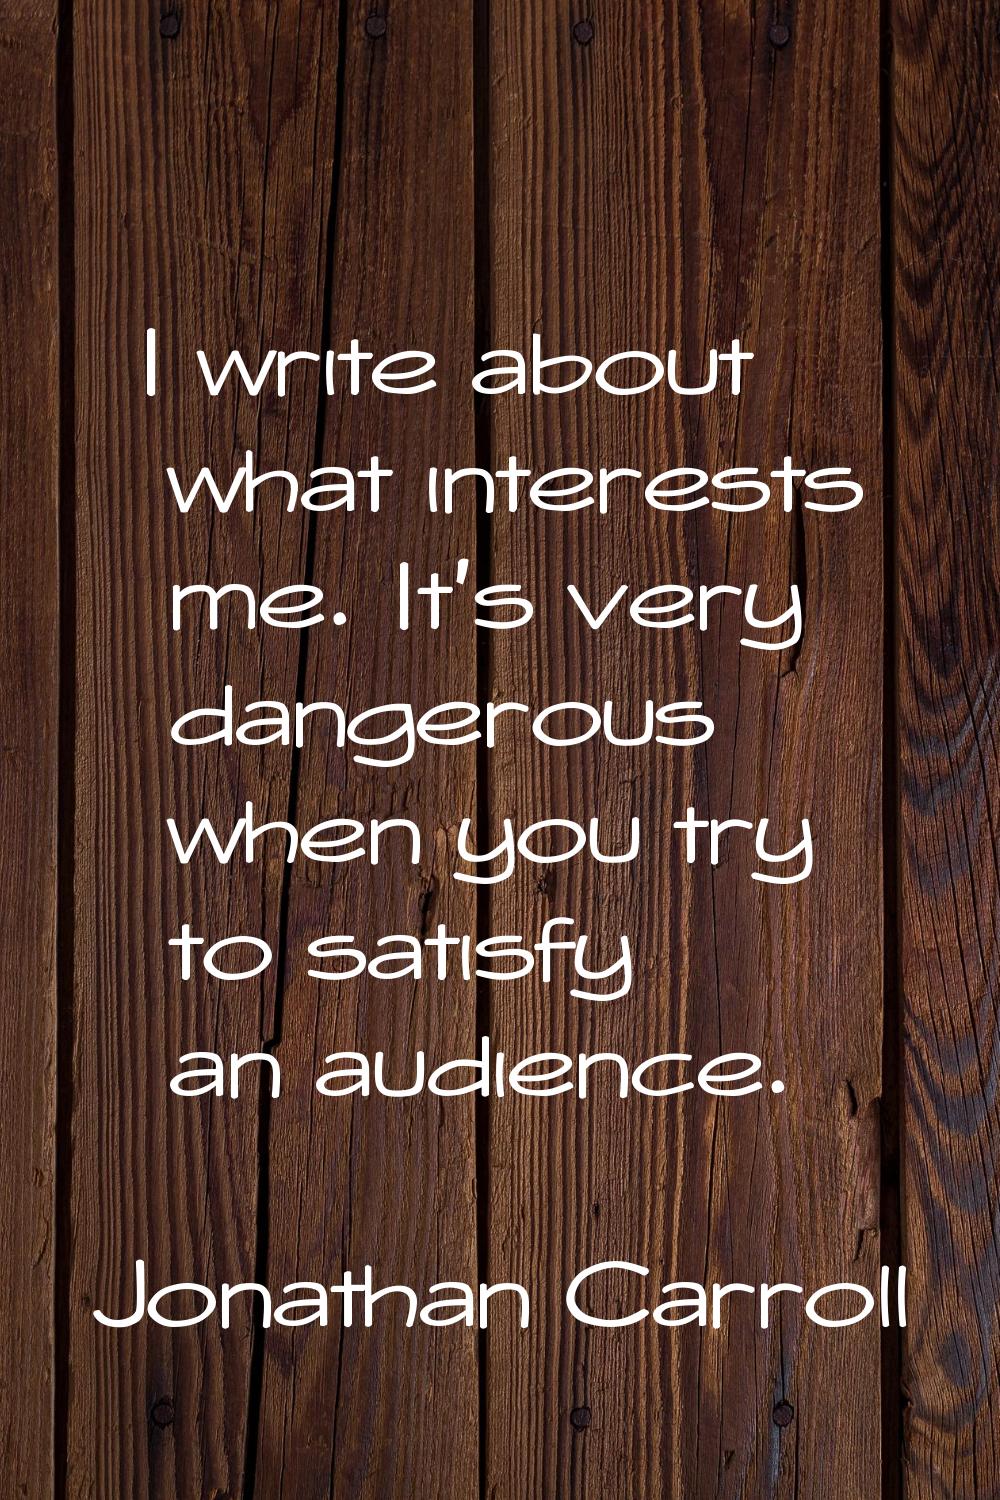 I write about what interests me. It's very dangerous when you try to satisfy an audience.